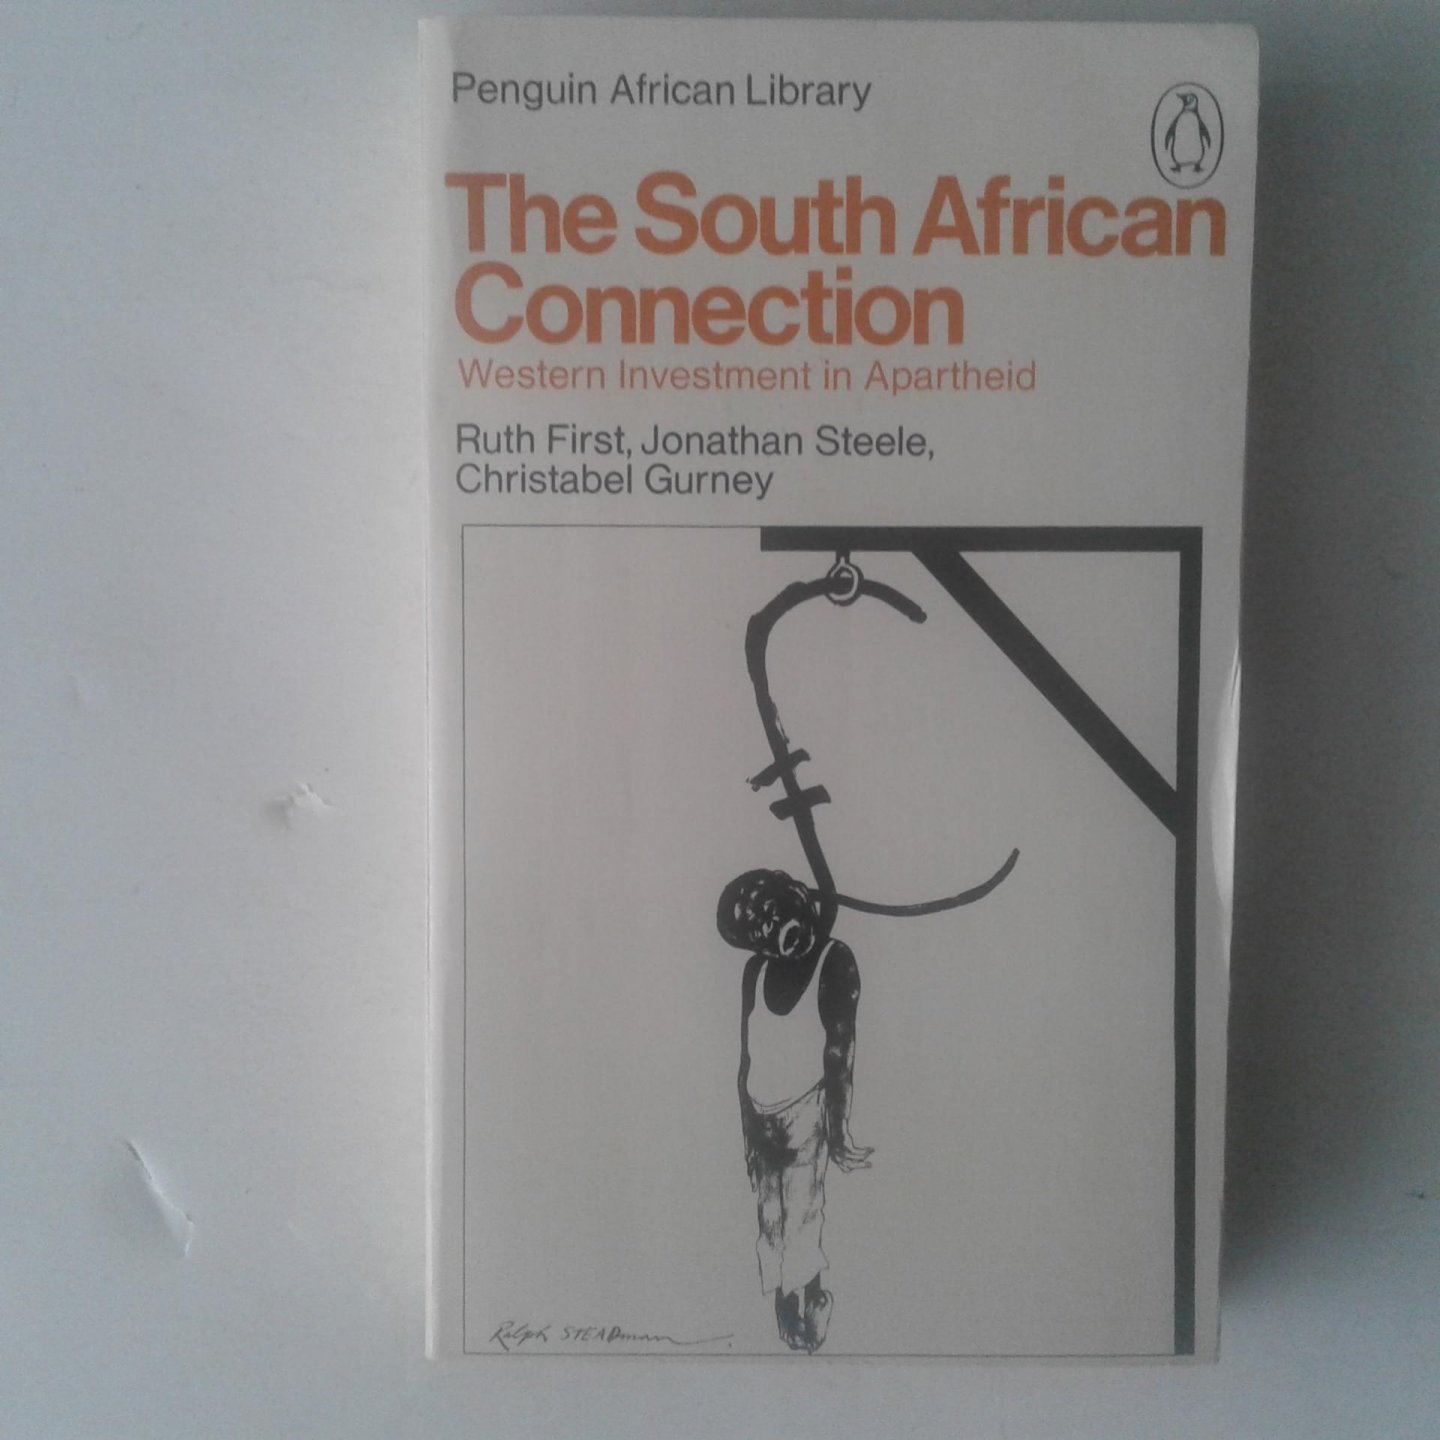 First, Ruth ; Steele, Jonathan ; Gurney, Christabel - The South African Connection ; Western Investment in Apartheid